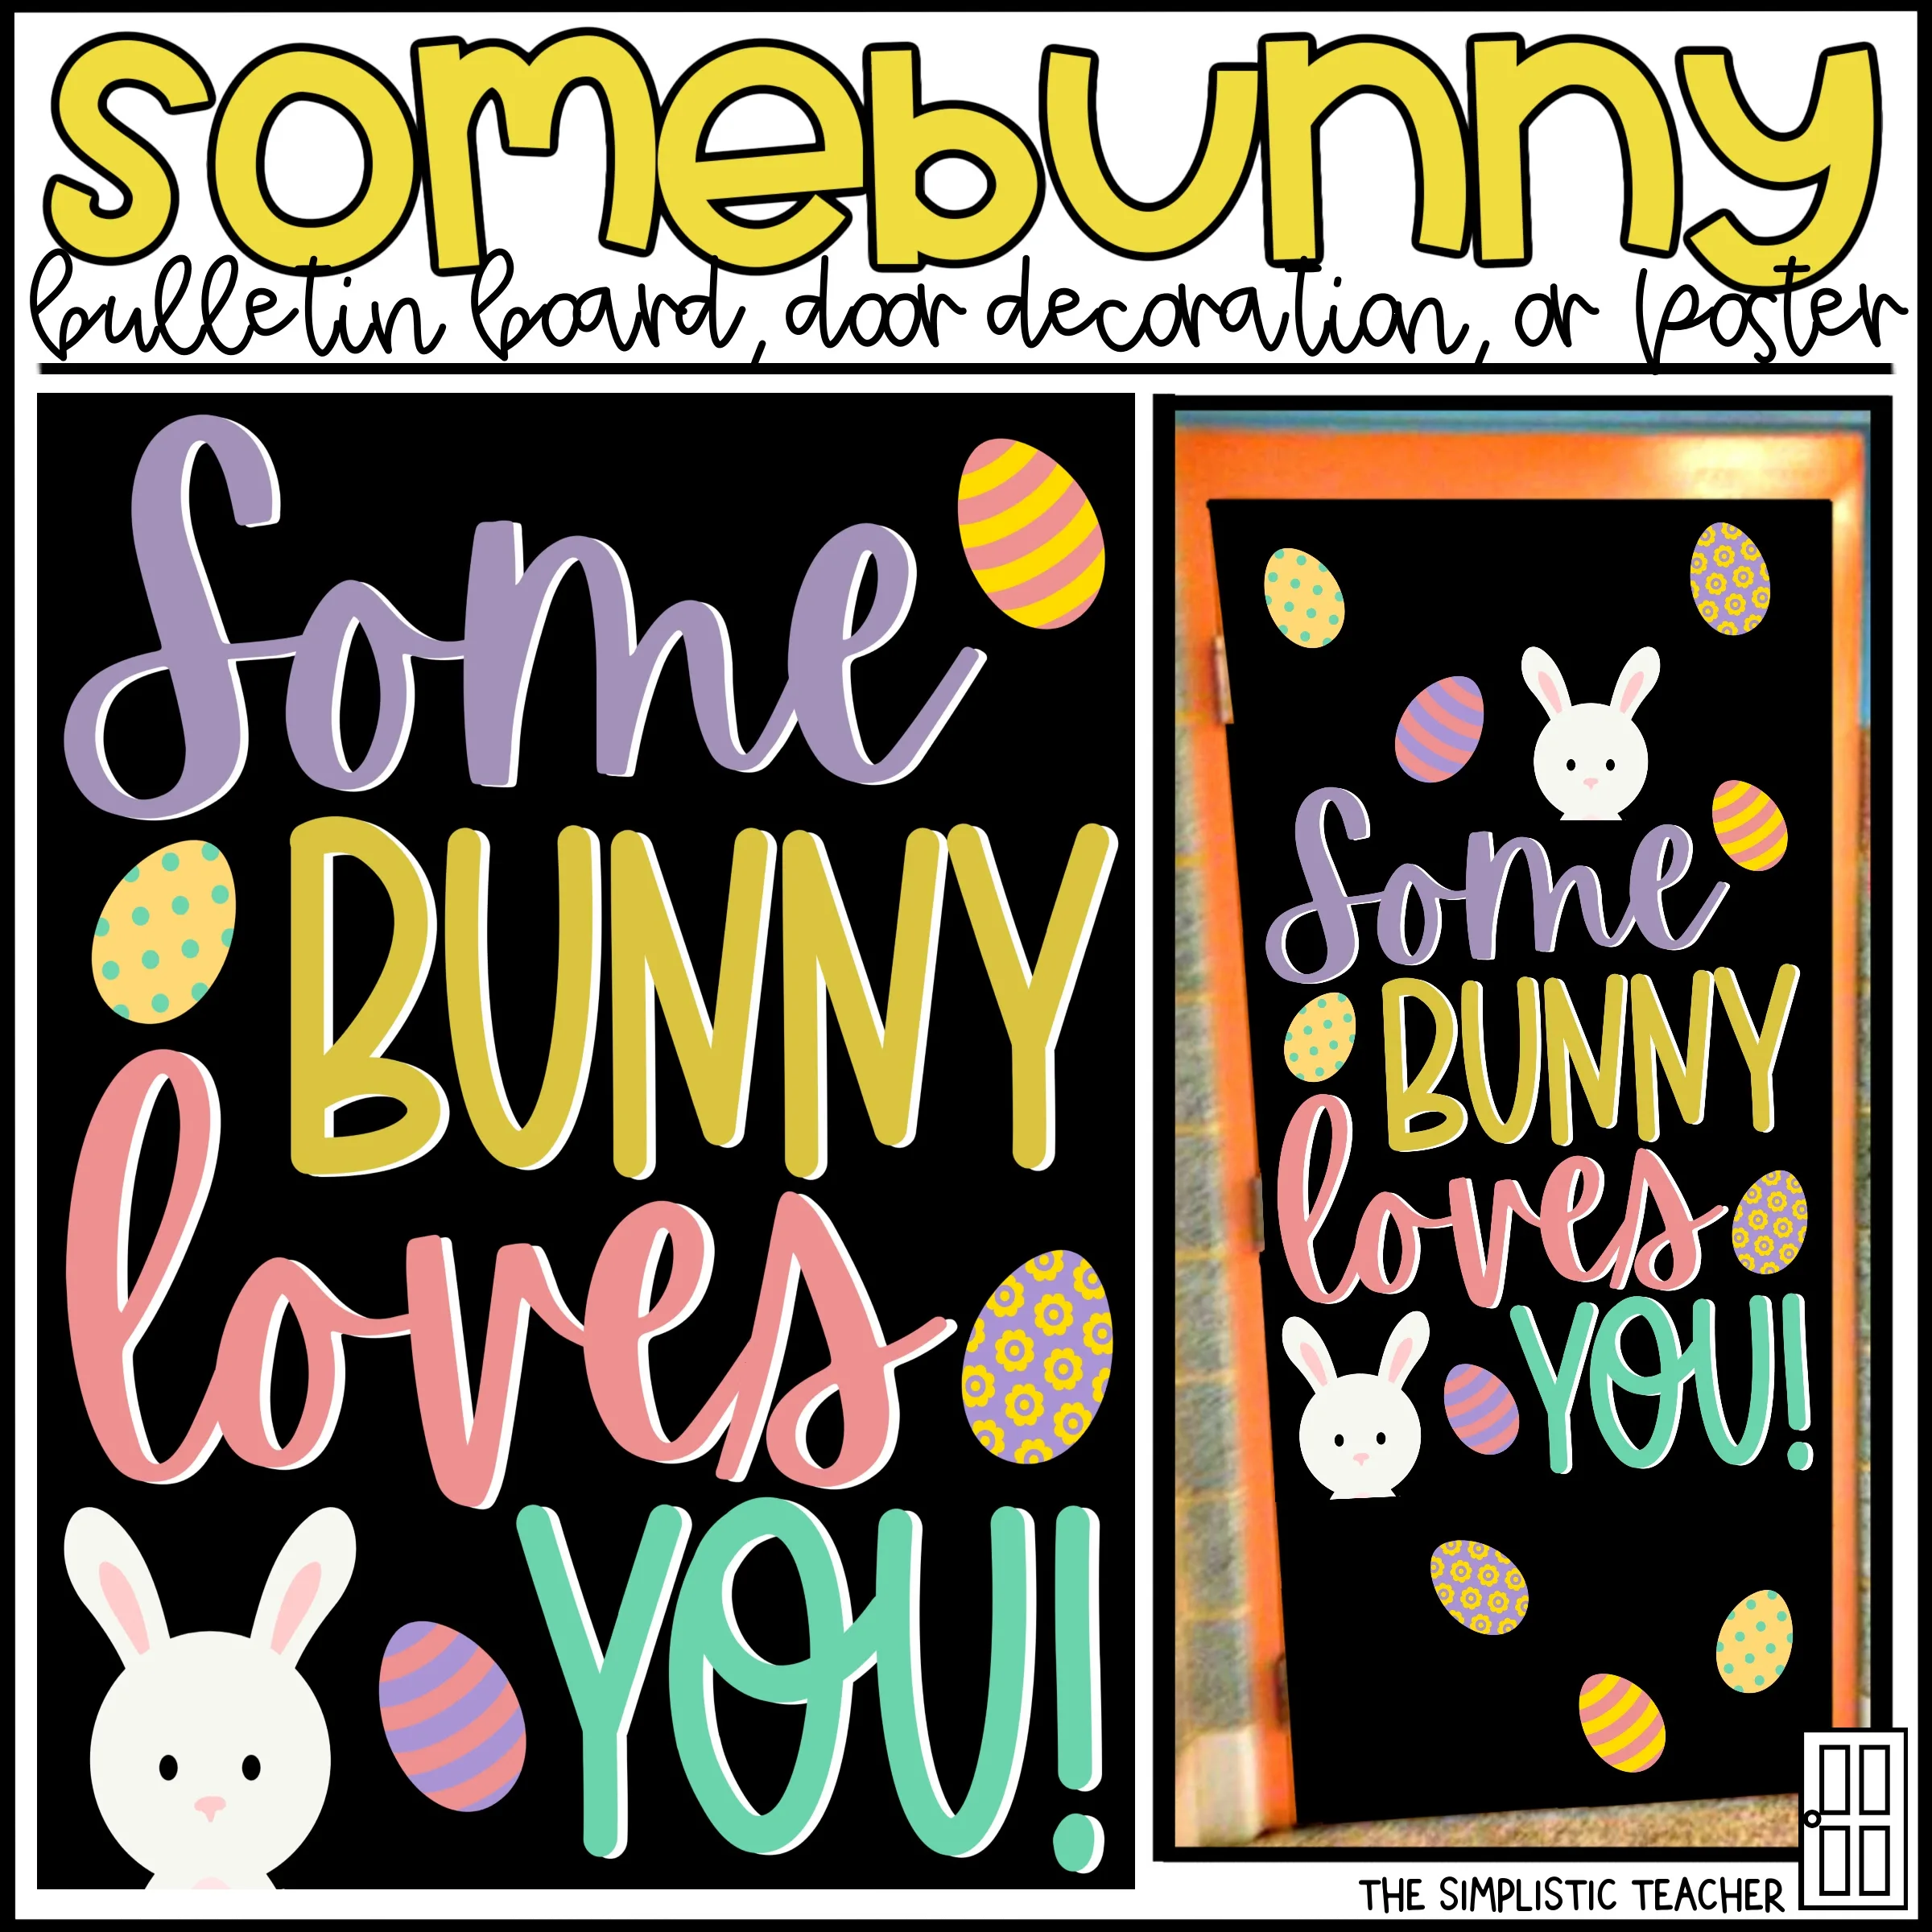 An educational teaching resource from The Simplistic Teacher entitled Some Bunny Loves You Easter April Bulletin Board, Door Decor, or Poster downloadable at Teach Simple.